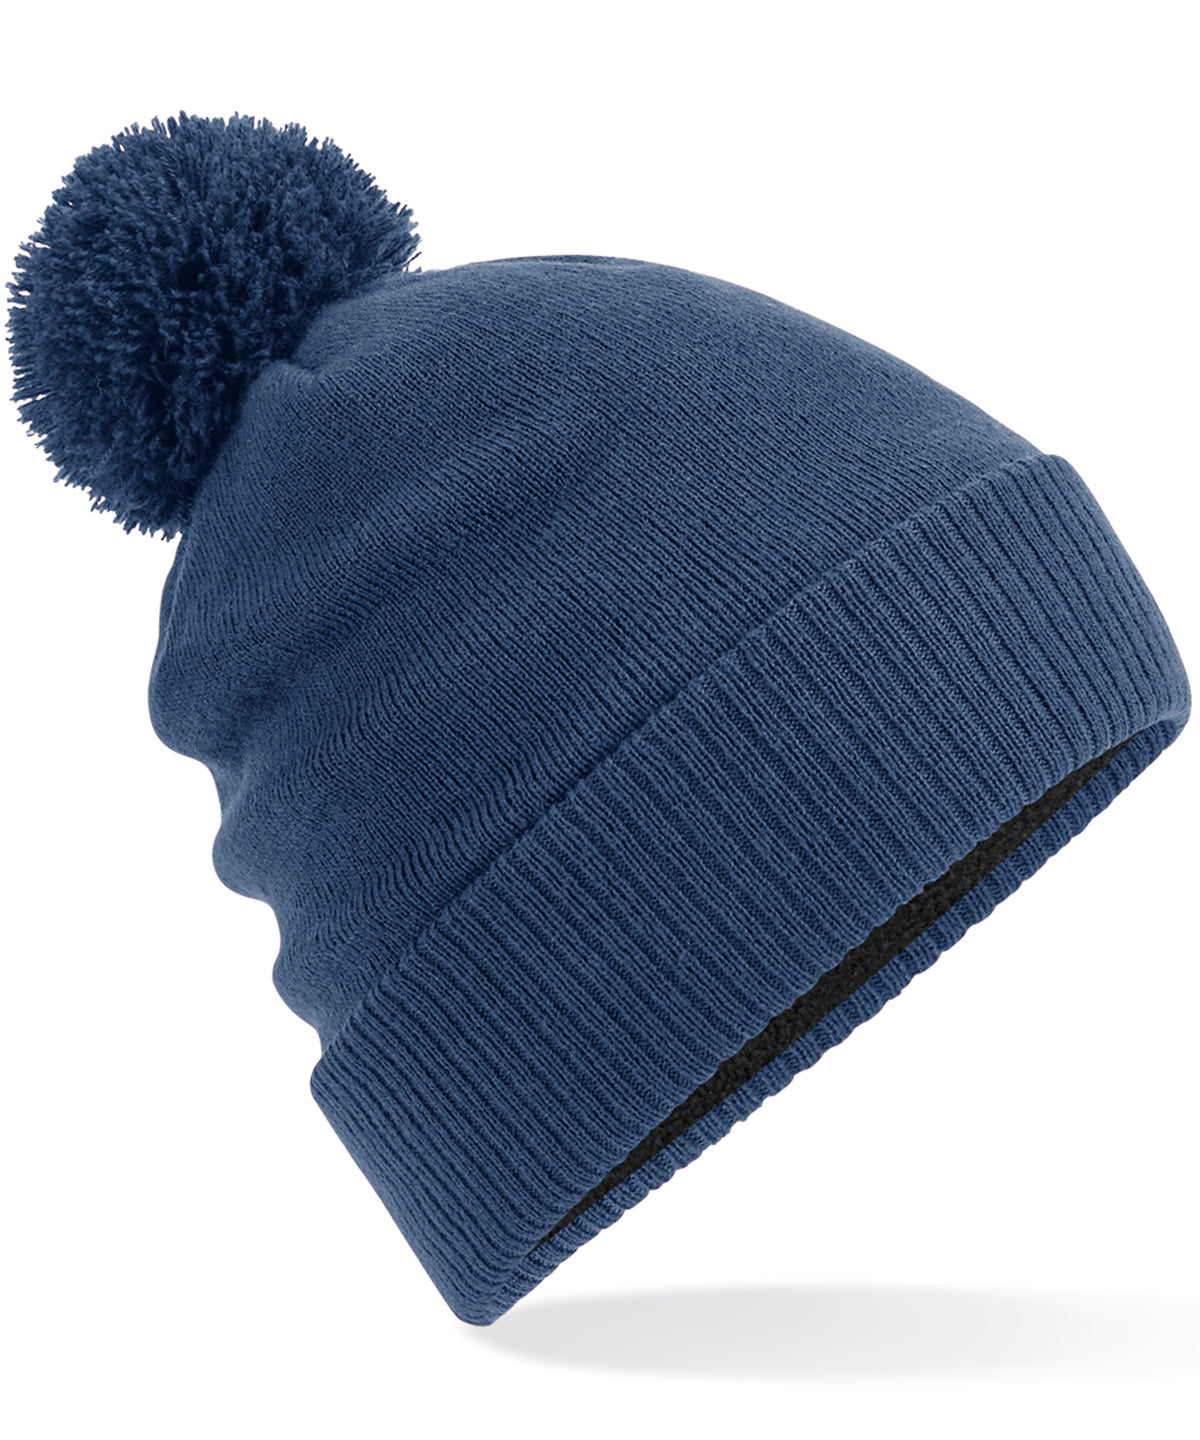 Personalised Hats - Mid Blue Beechfield Water-repellent thermal Snowstar® beanie